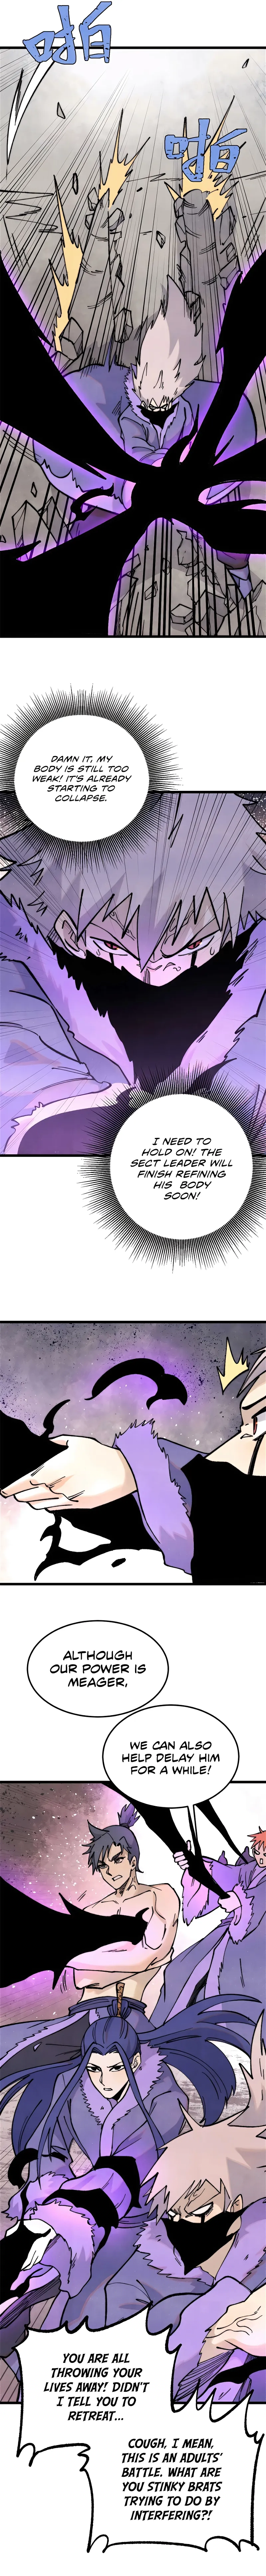 All Hail The Sect Leader Chapter 312 page 12